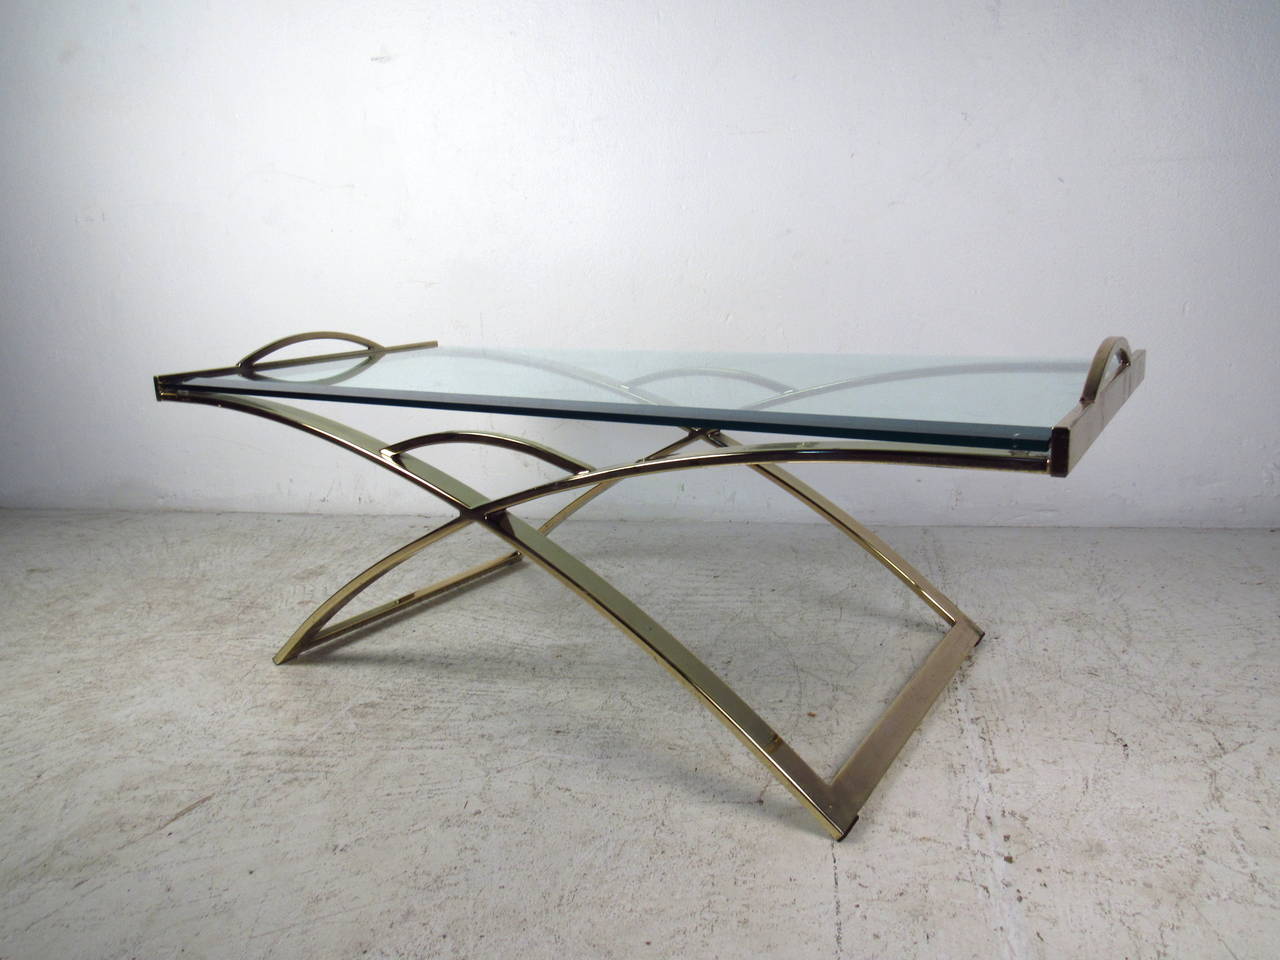 This midcentury coffee table features a unique design with a beautiful brass plated finish and bevelled glass top which offer a sleek modern flare to any home or office space.

Please confirm item location (NY or NJ) with dealer.